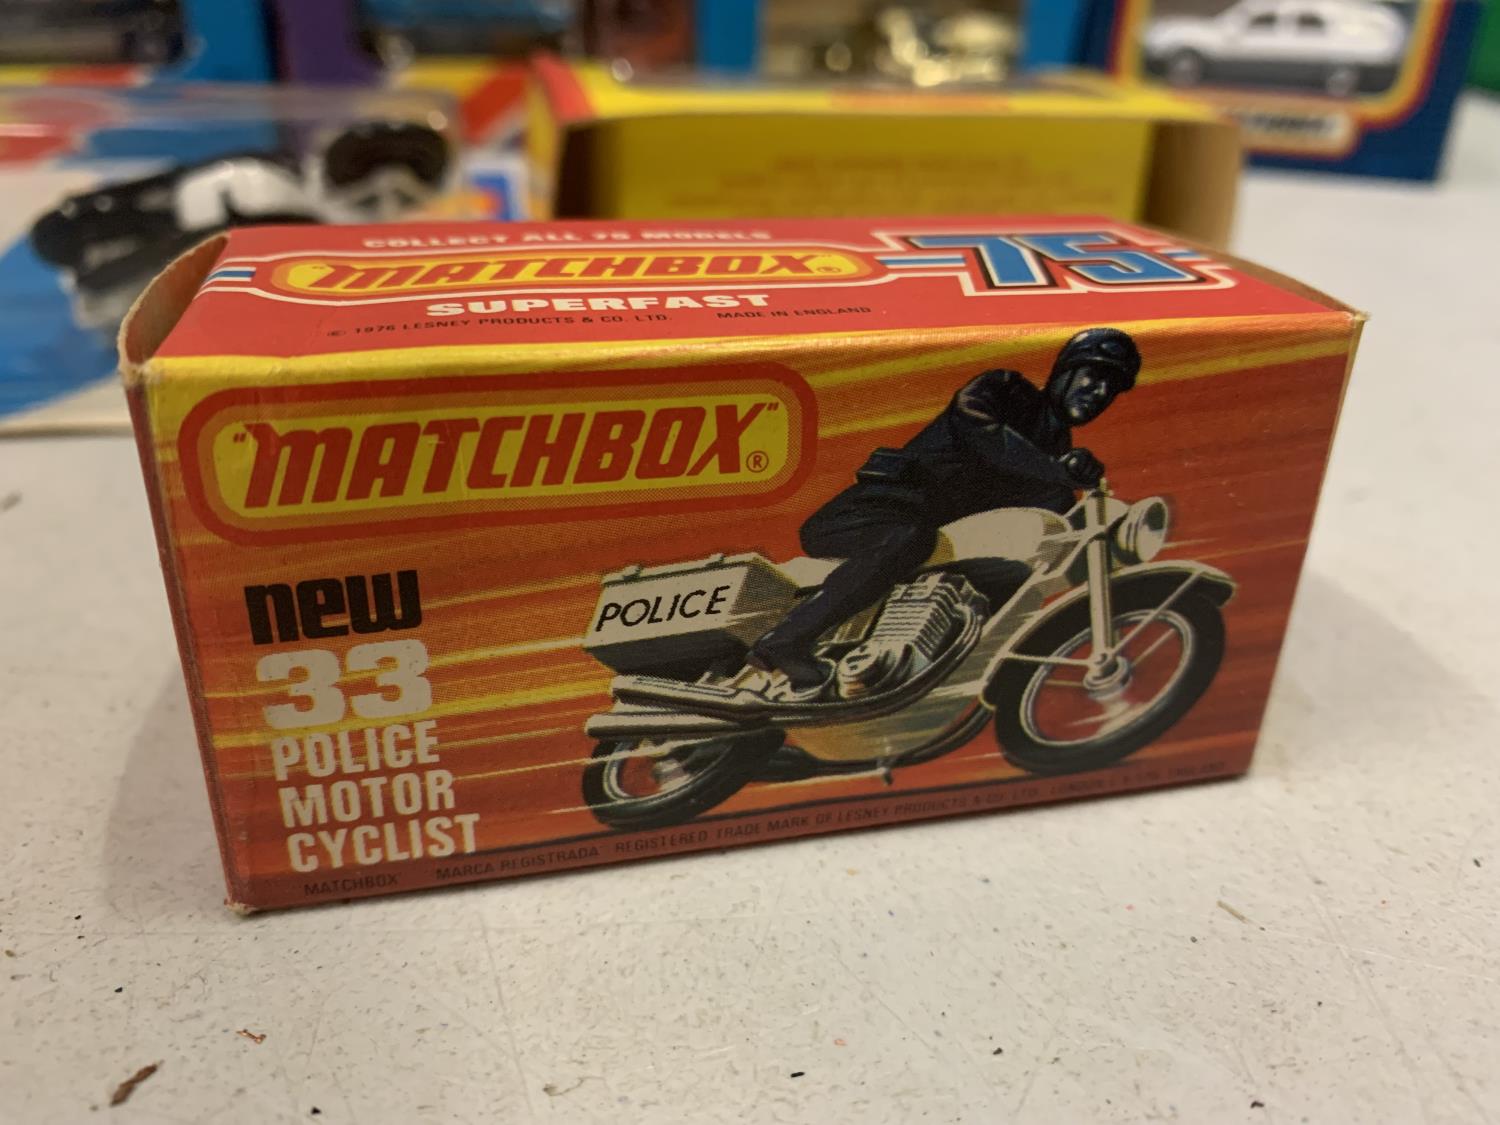 A COLLECTION OF BOXED AND UNBOXED MATCHBOX VEHICLES - ALL MODEL NUMBER 33 OF VARIOUS ERAS AND - Image 2 of 6